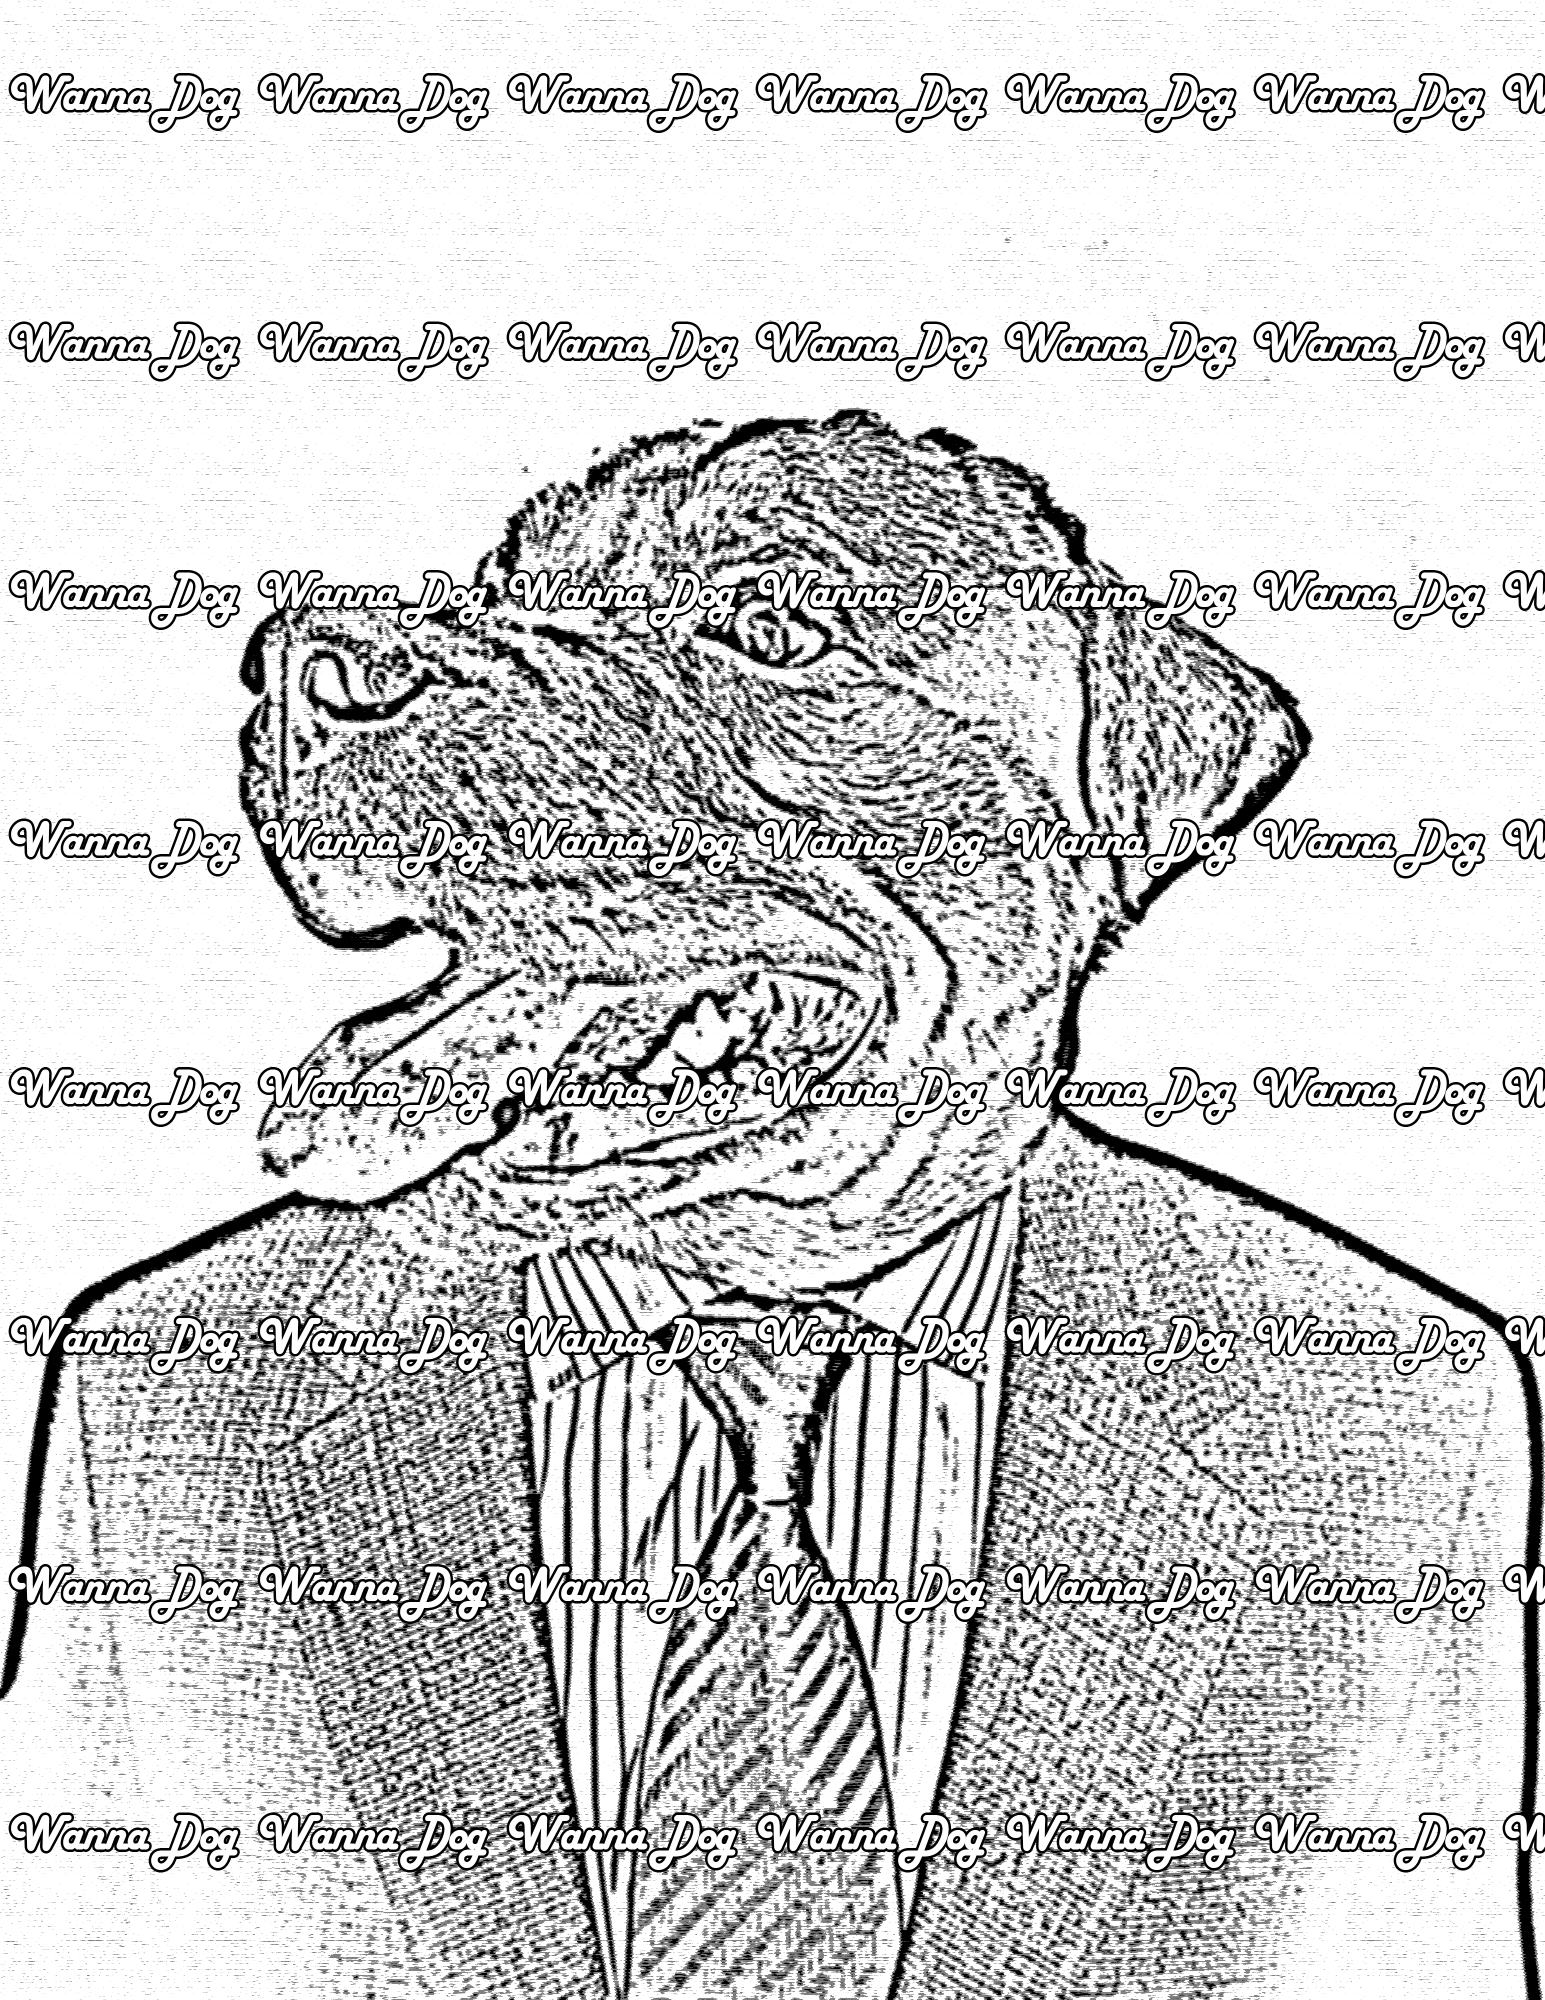 Rottweiler Coloring Page of a Rottweiler with a suit and tie